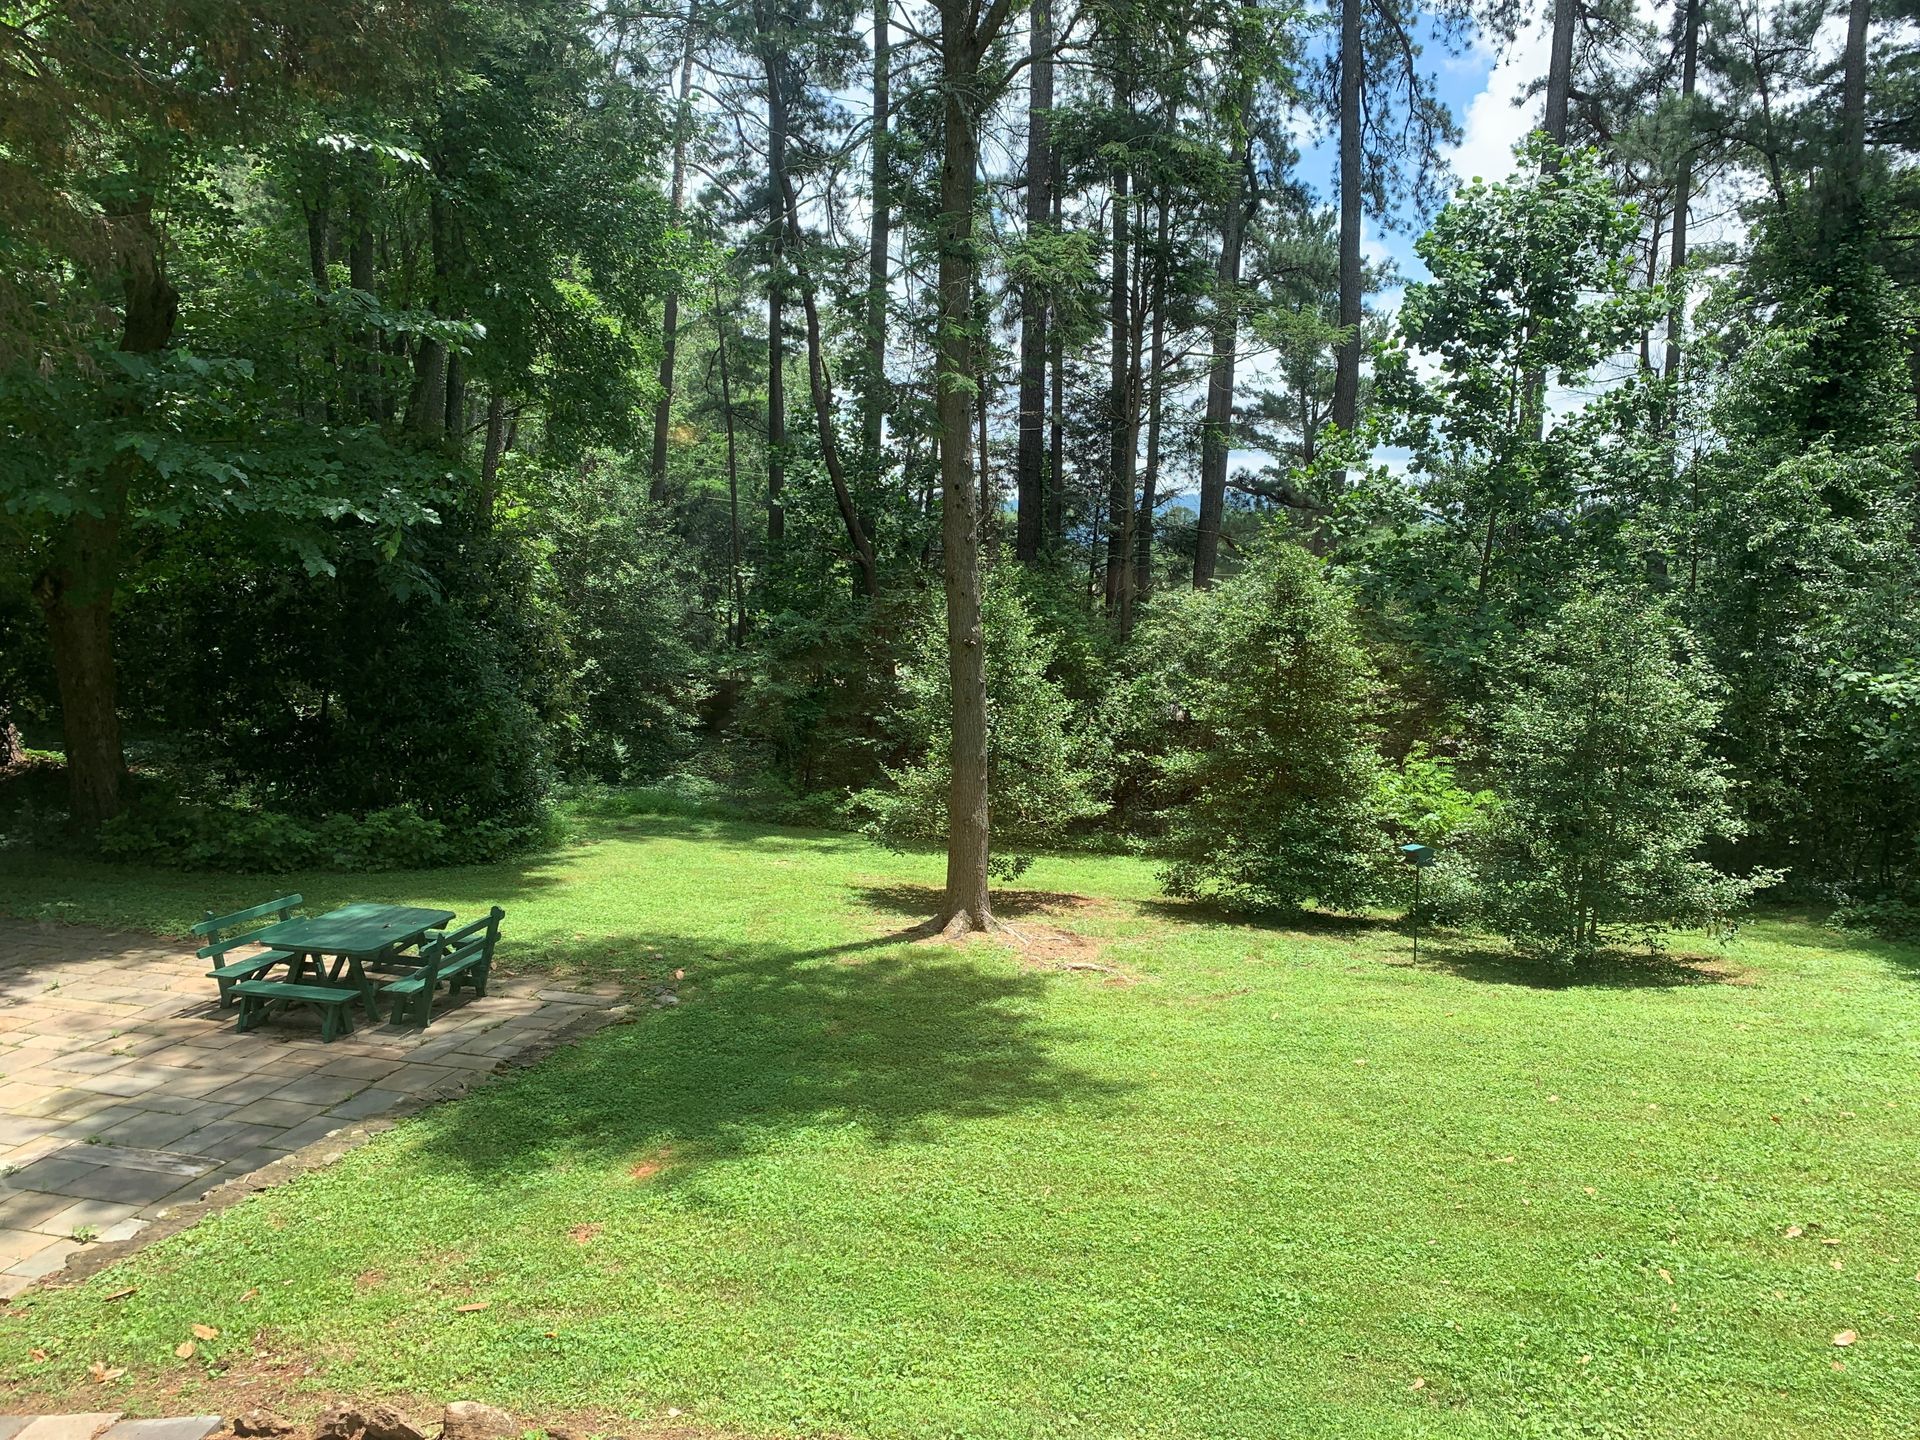 The backyard of Dunlodge cabins shows a large, grassy area with an outdoor seating area.